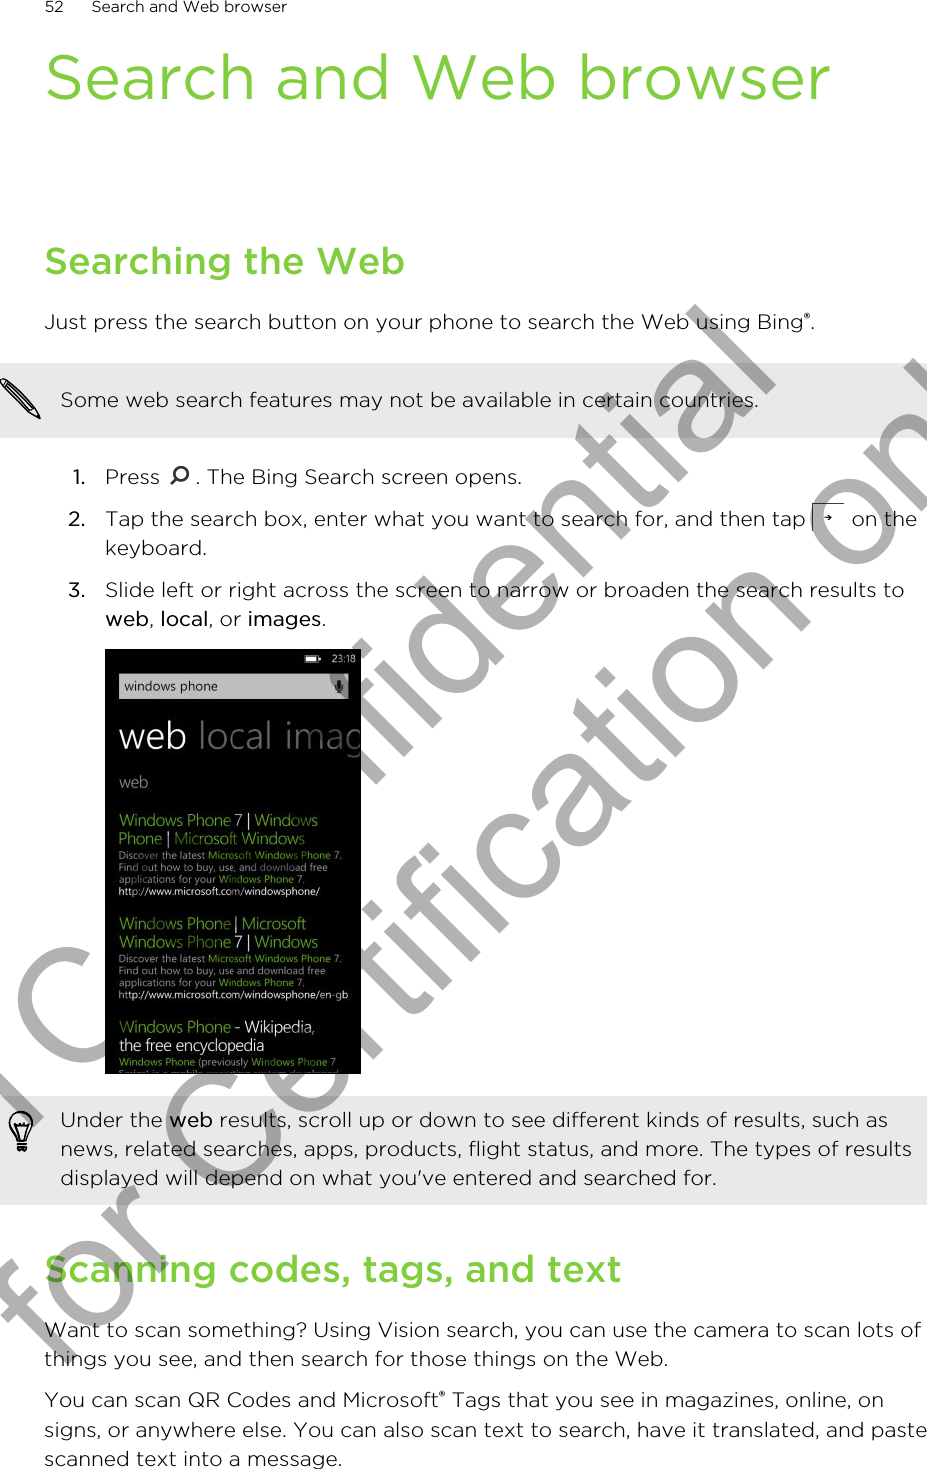 Search and Web browserSearching the WebJust press the search button on your phone to search the Web using Bing®.Some web search features may not be available in certain countries.1. Press  . The Bing Search screen opens.2. Tap the search box, enter what you want to search for, and then tap   on thekeyboard.3. Slide left or right across the screen to narrow or broaden the search results toweb, local, or images. Under the web results, scroll up or down to see different kinds of results, such asnews, related searches, apps, products, flight status, and more. The types of resultsdisplayed will depend on what you&apos;ve entered and searched for.Scanning codes, tags, and textWant to scan something? Using Vision search, you can use the camera to scan lots ofthings you see, and then search for those things on the Web.You can scan QR Codes and Microsoft® Tags that you see in magazines, online, onsigns, or anywhere else. You can also scan text to search, have it translated, and pastescanned text into a message.52 Search and Web browserHTC Confidential for Certification only